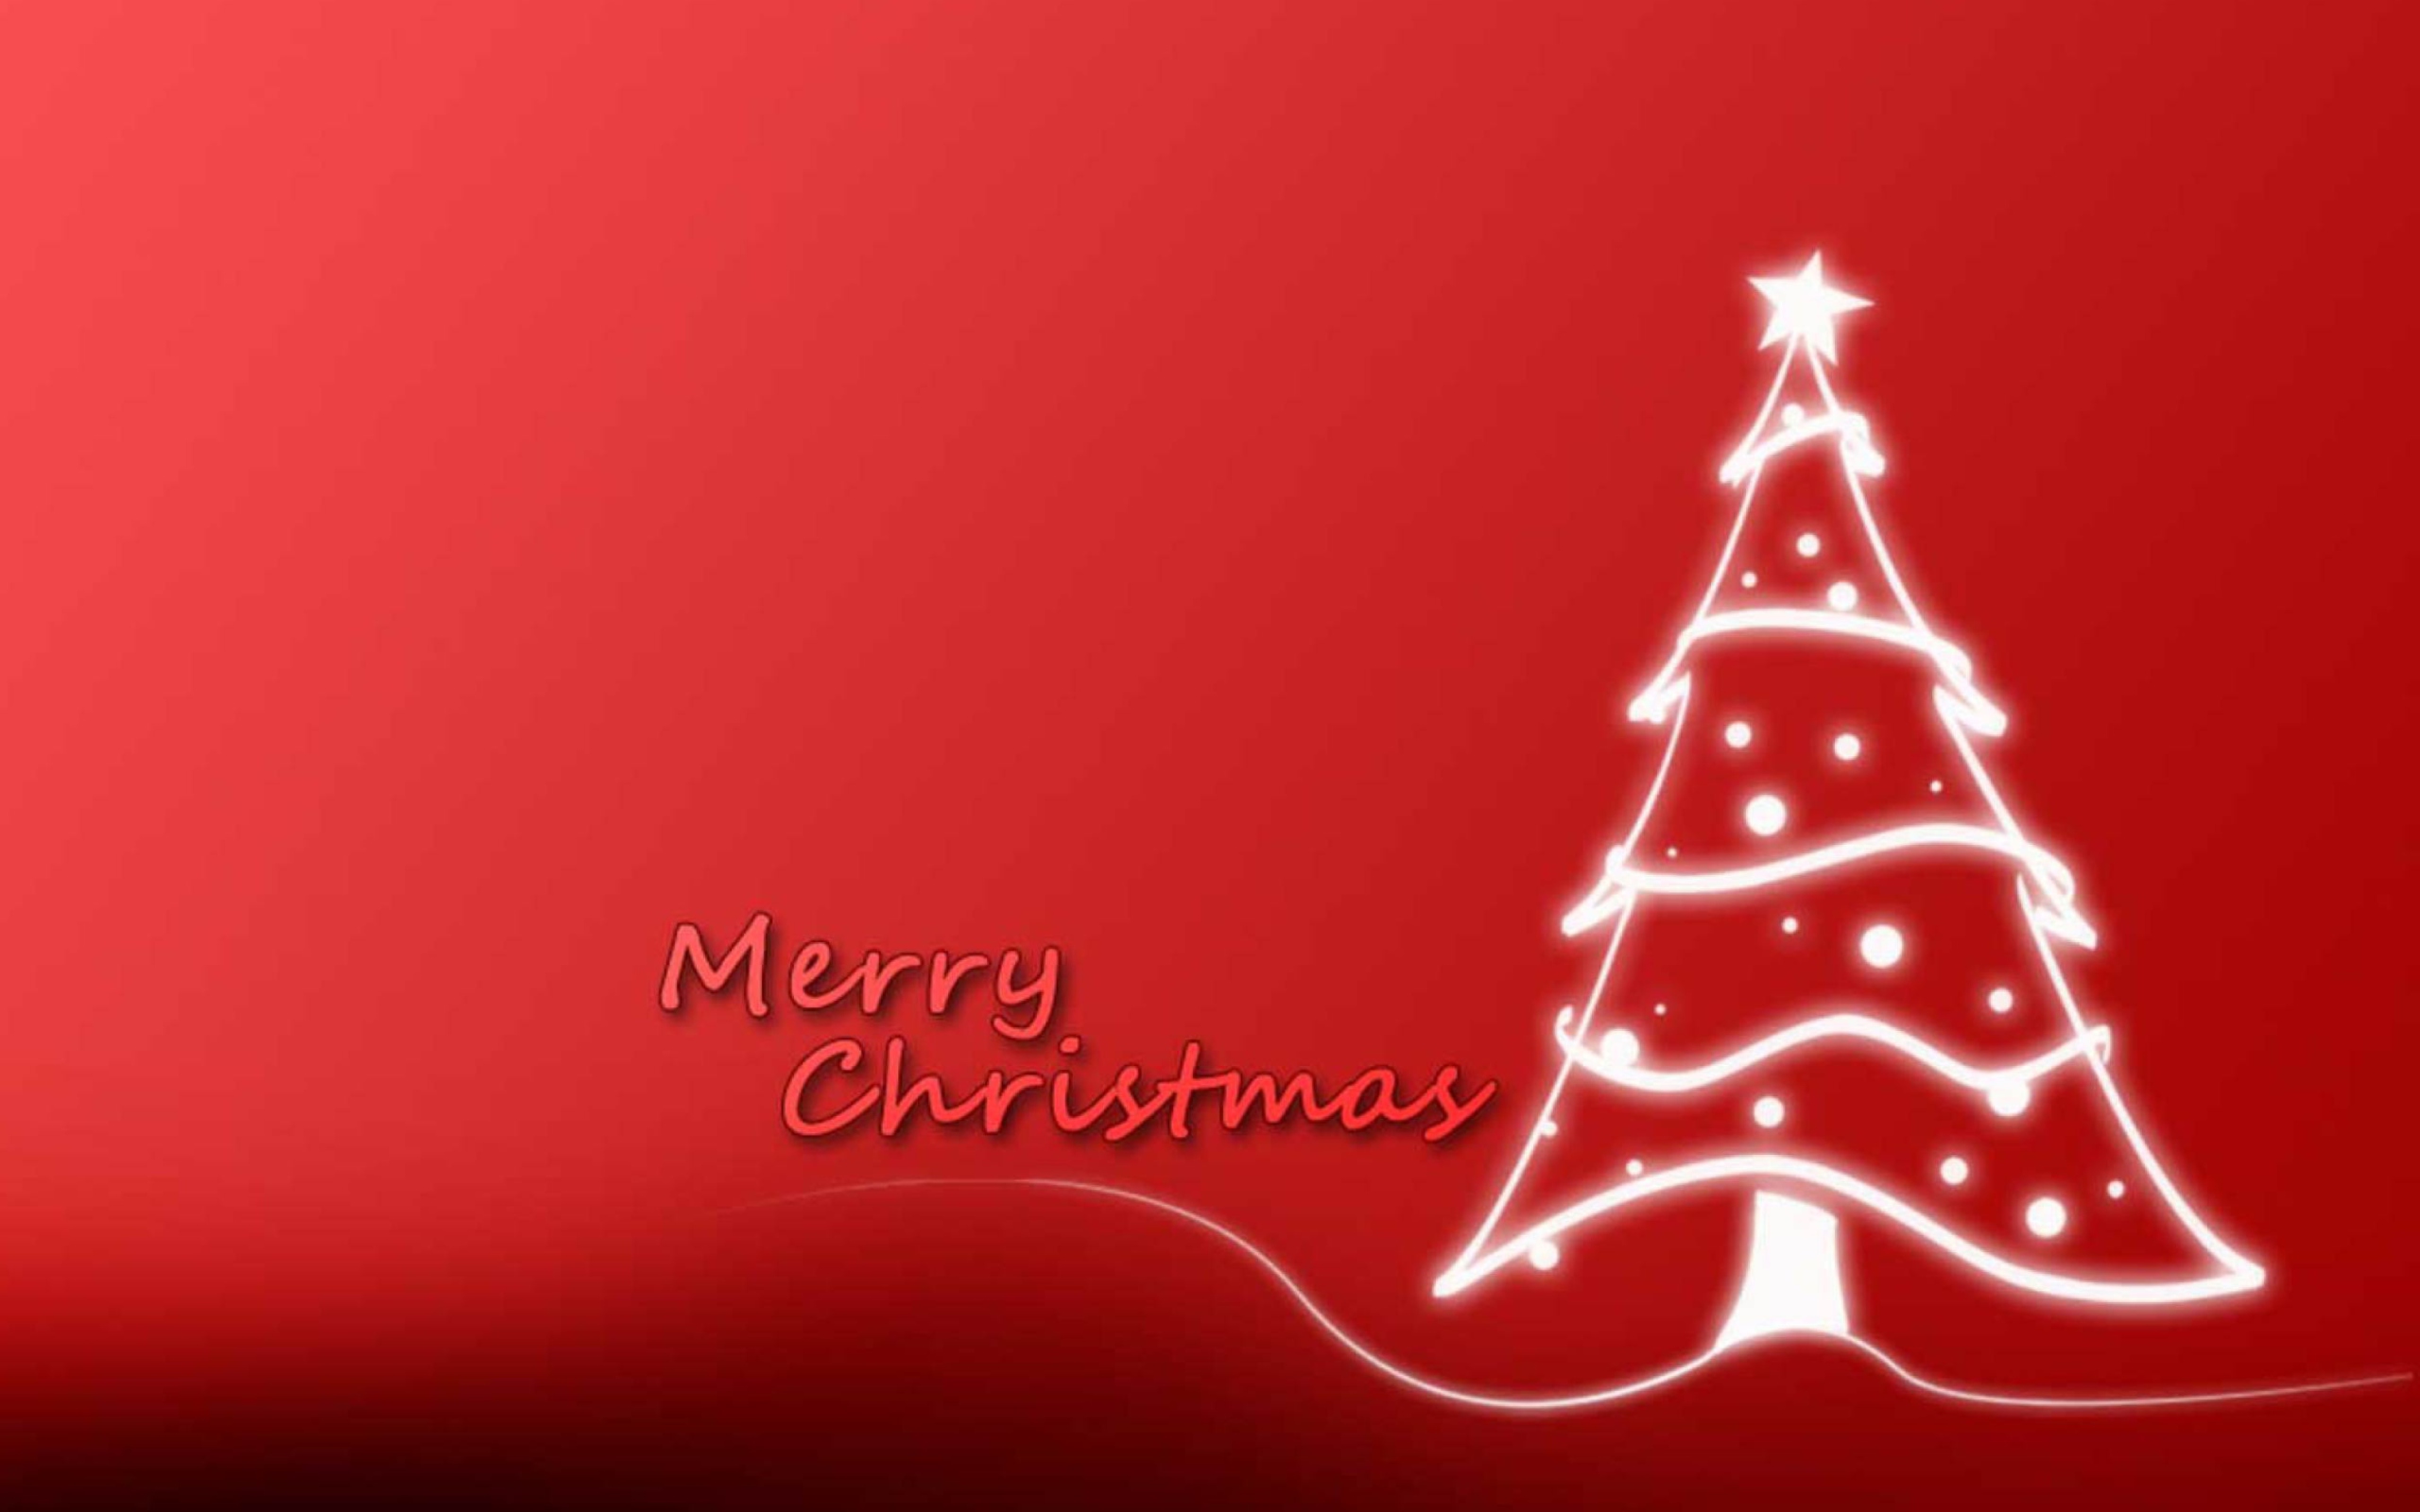 Christmas Red And White Tree wallpaper 2560x1600